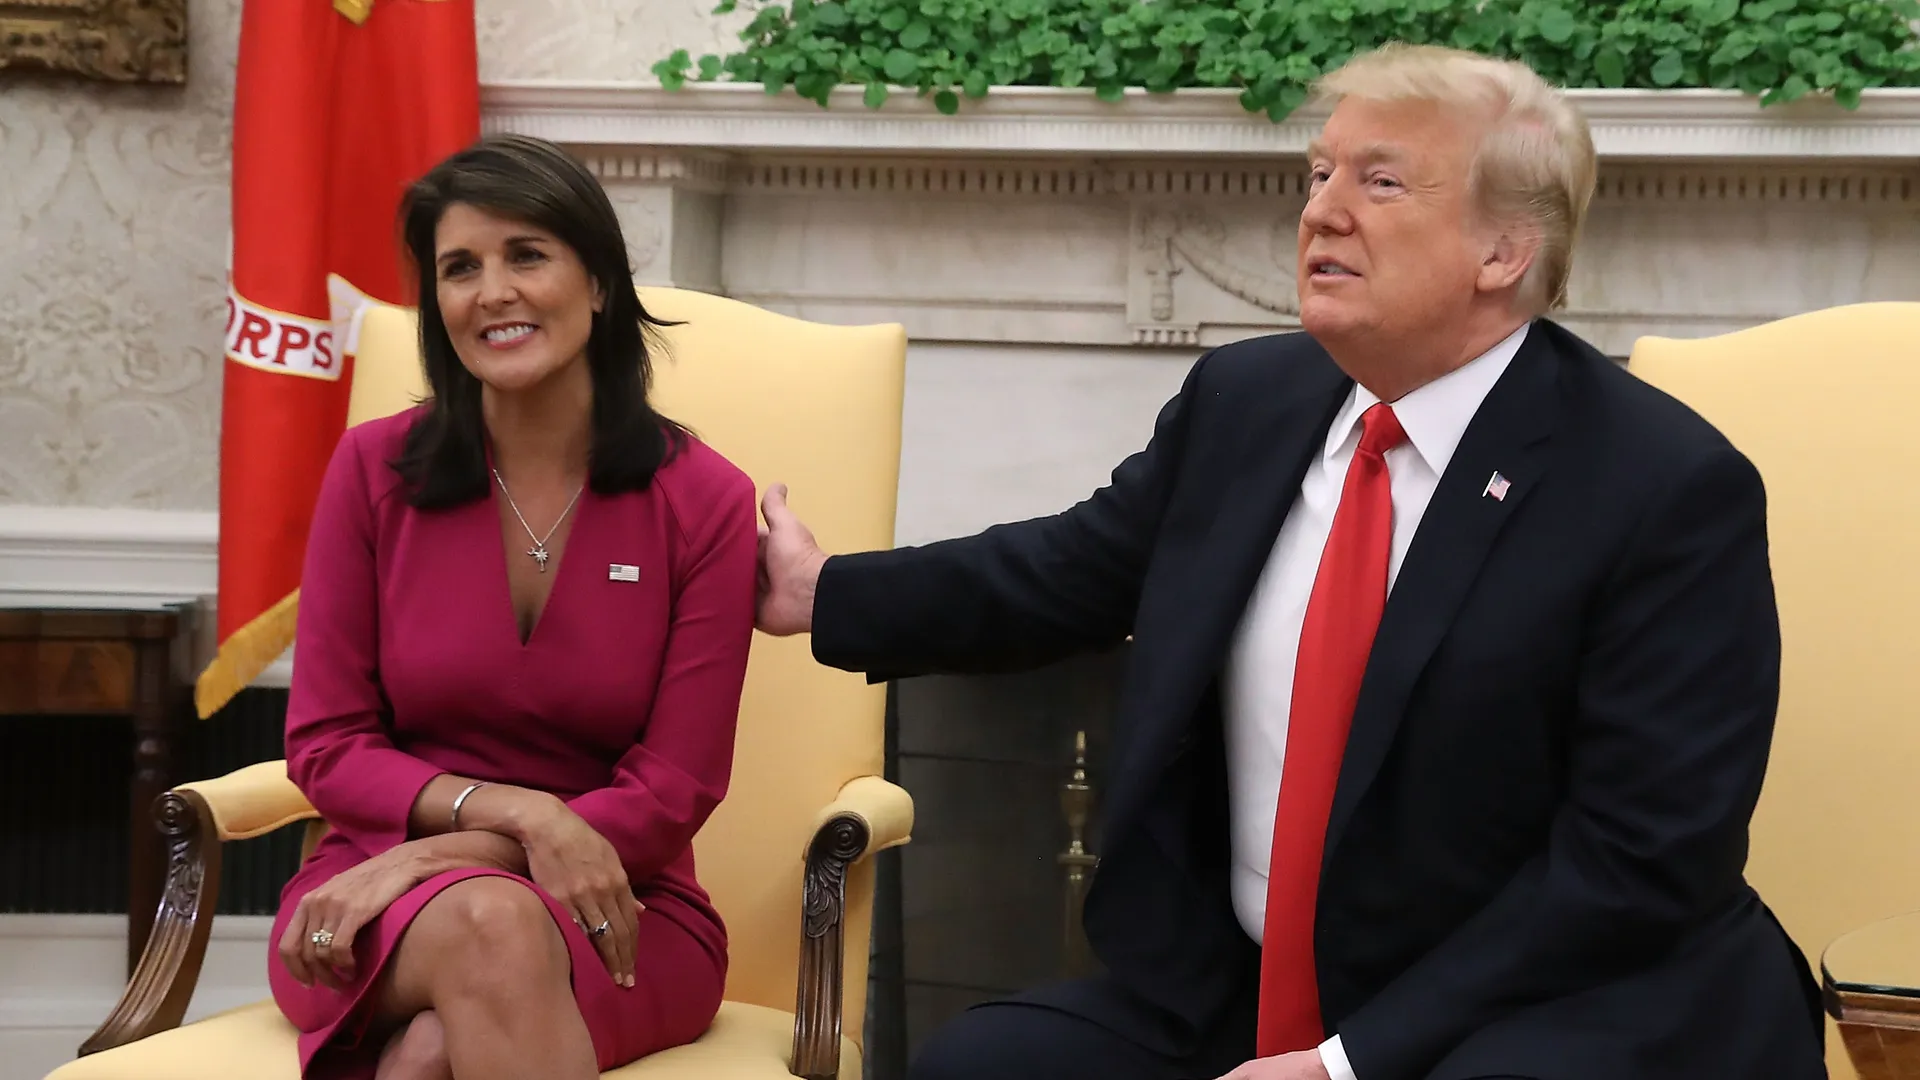 Trump Responds to Nikki Haley's Statement In Favor of Casting Vote For Him